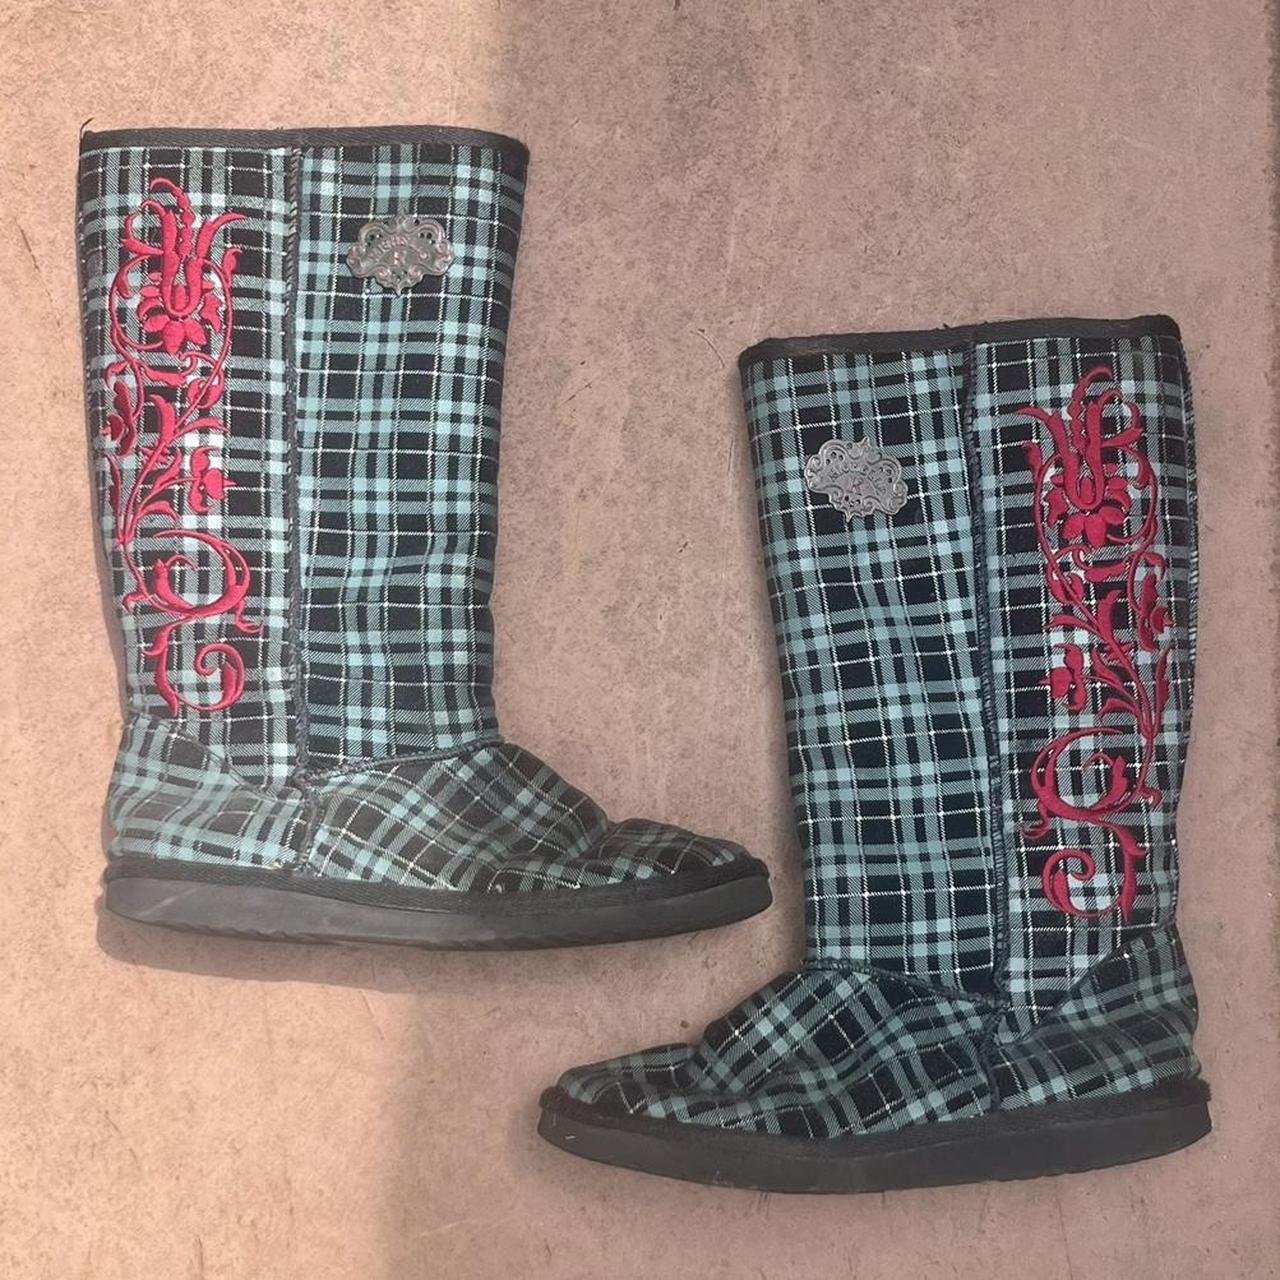 Great plaid boots Embroidered rose design on... - Depop